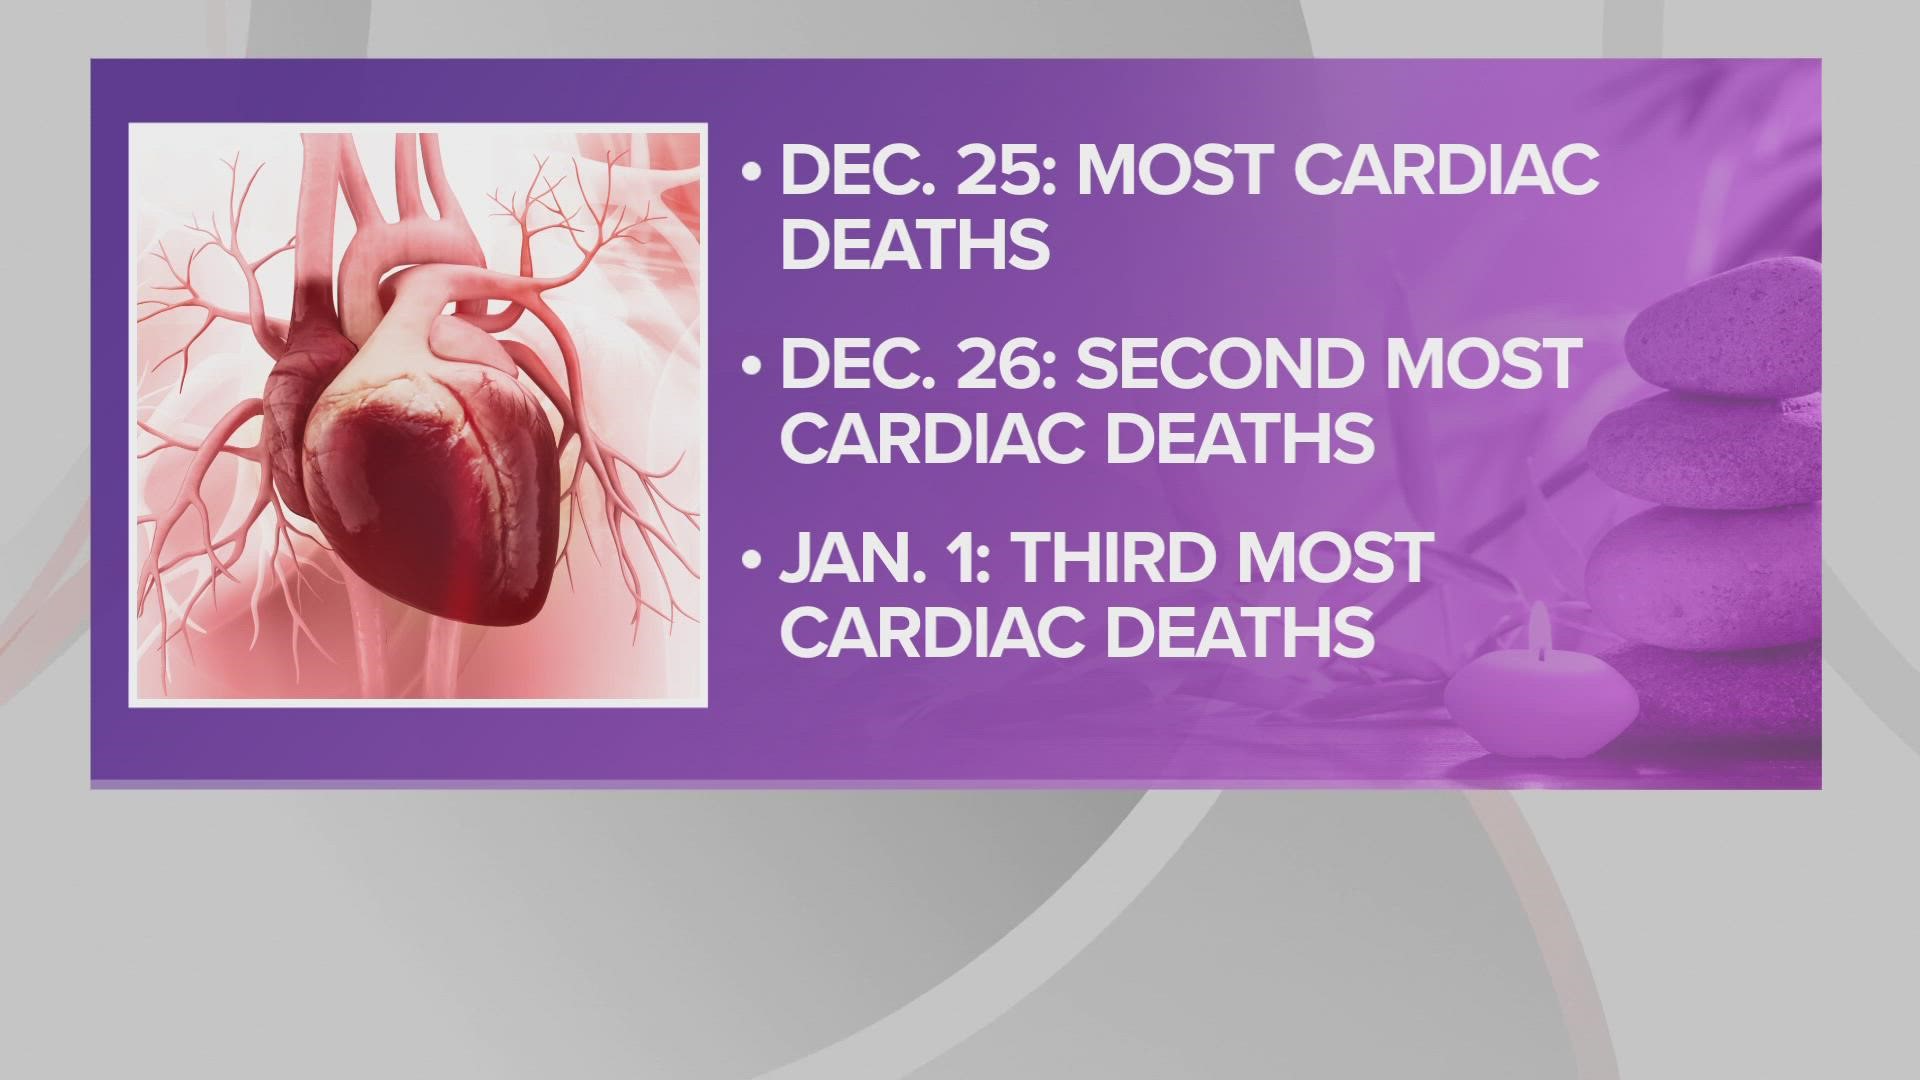 The American Heart Association reports more heart attacks between Christmas and New Year's Day than at any other time of the year.